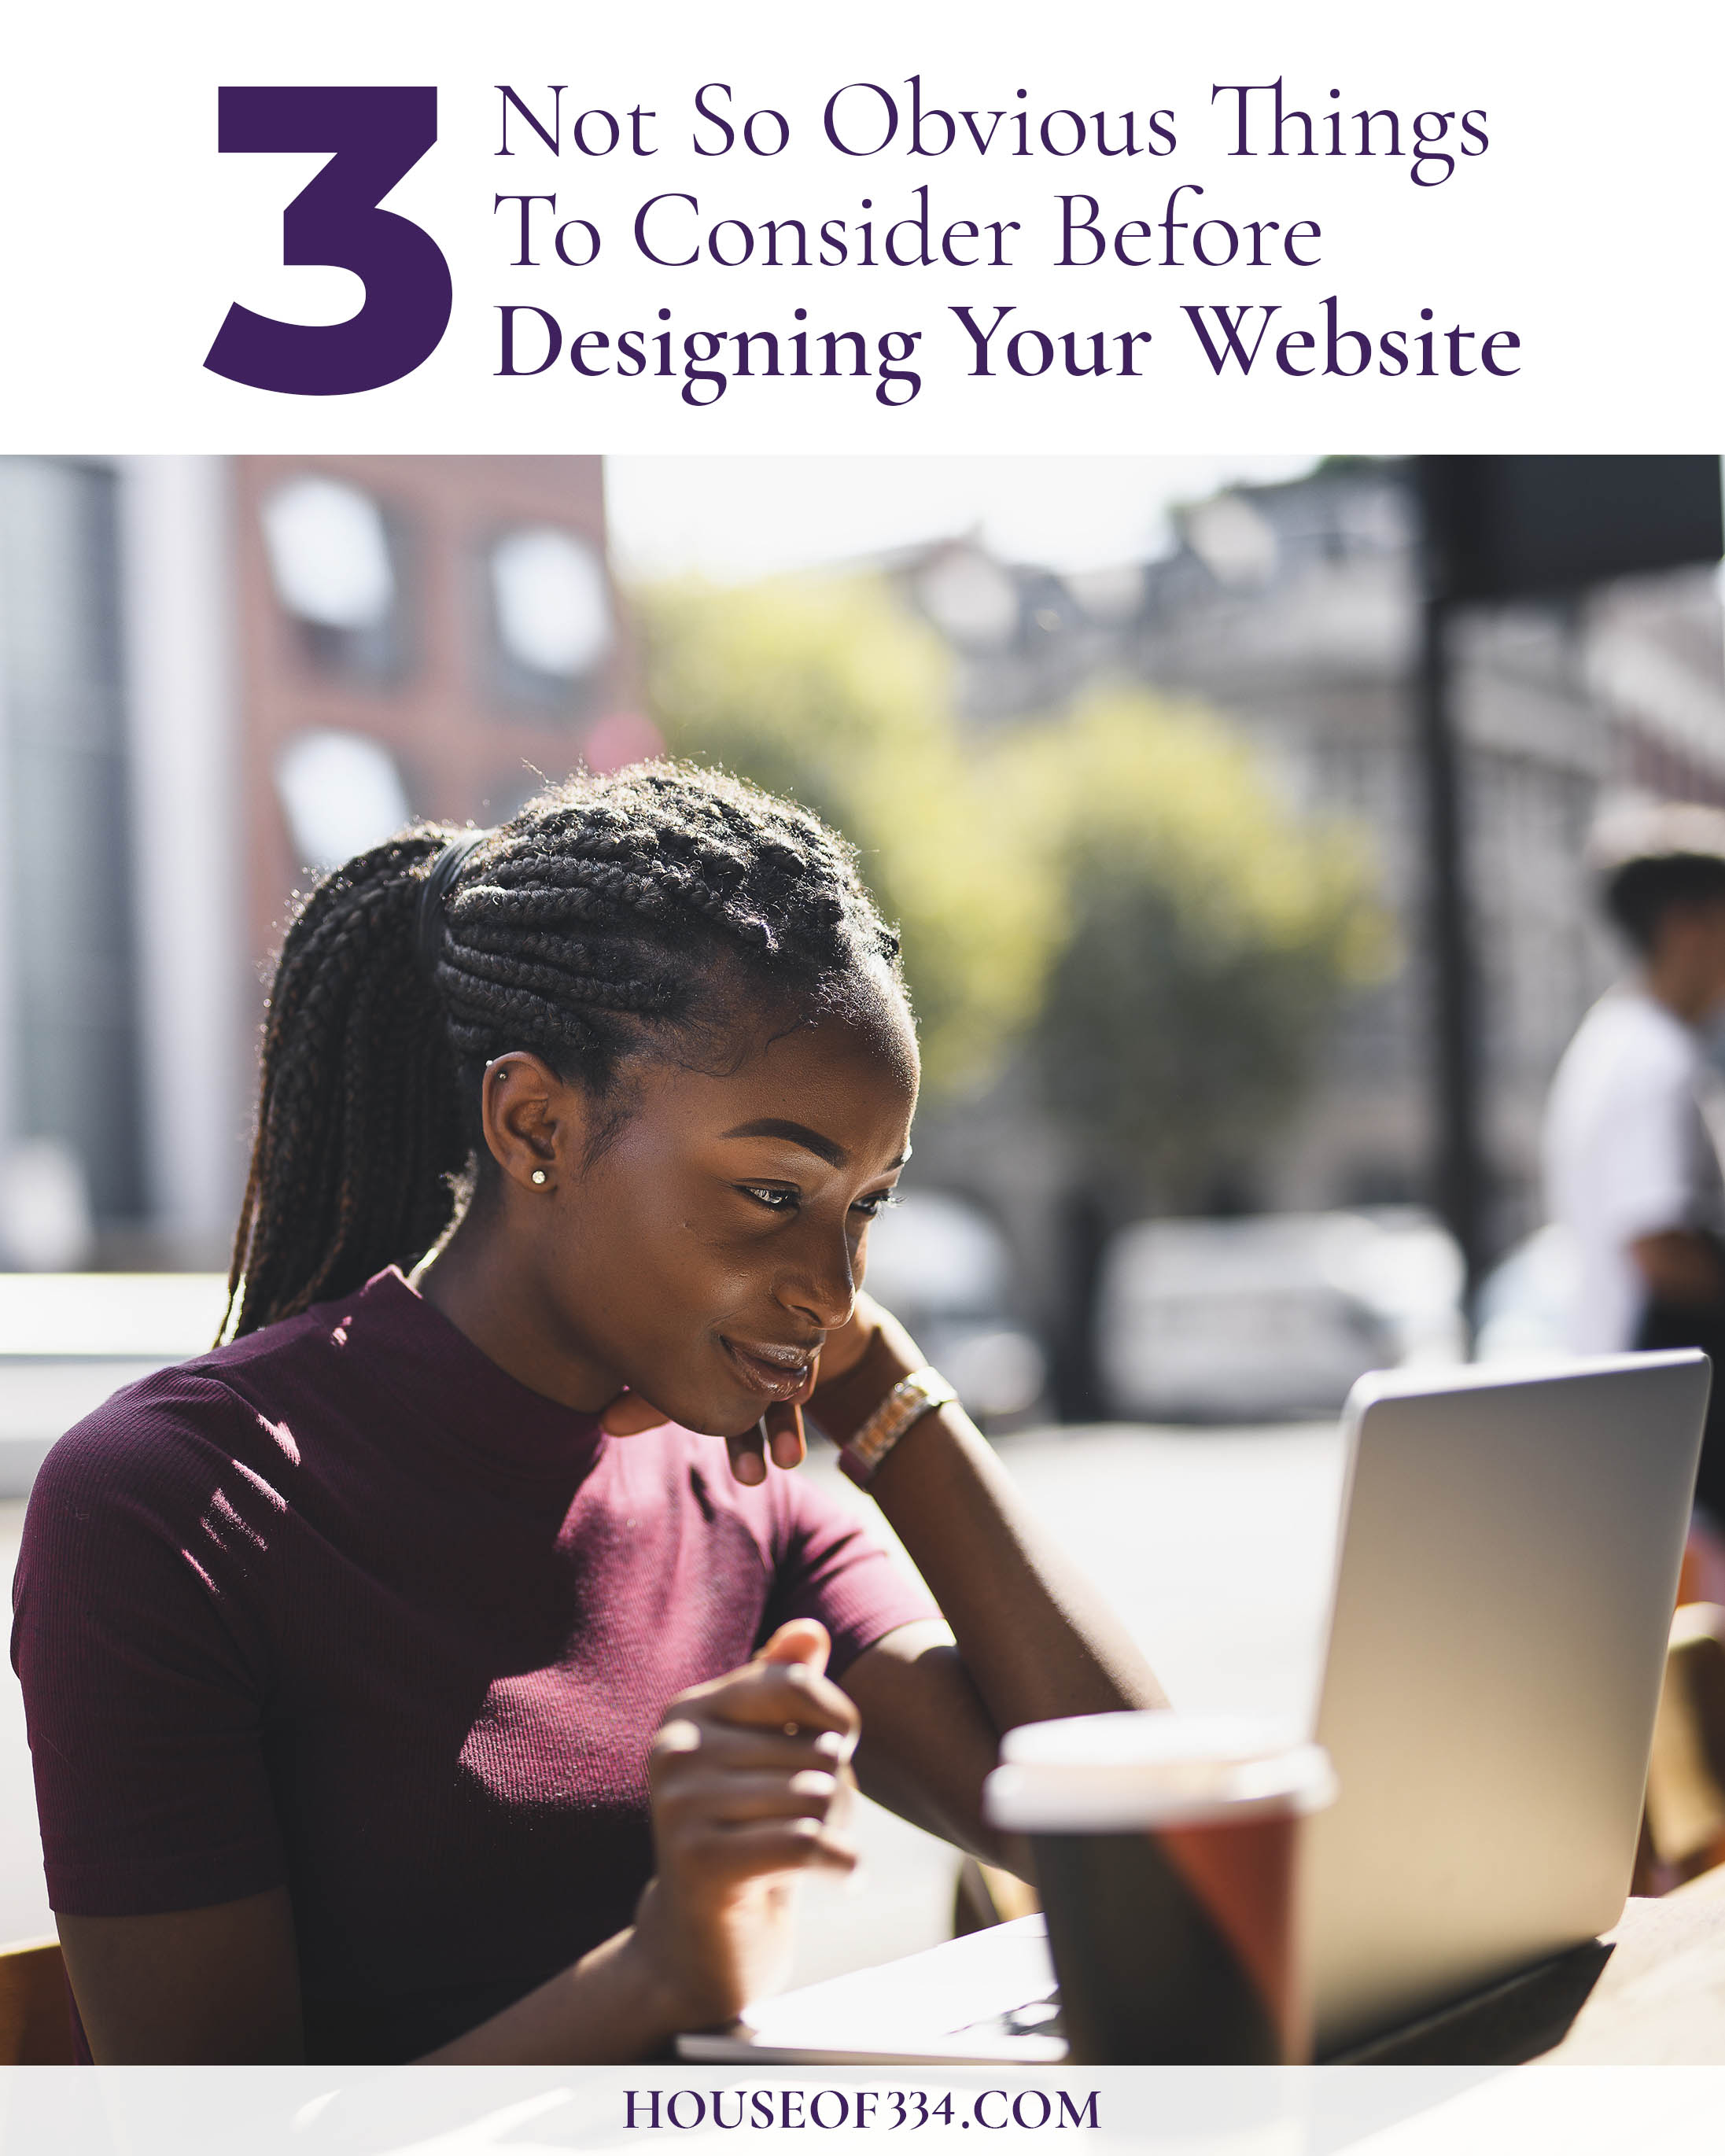 3 Not So Obvious Things to Consider Before Designing Your Website